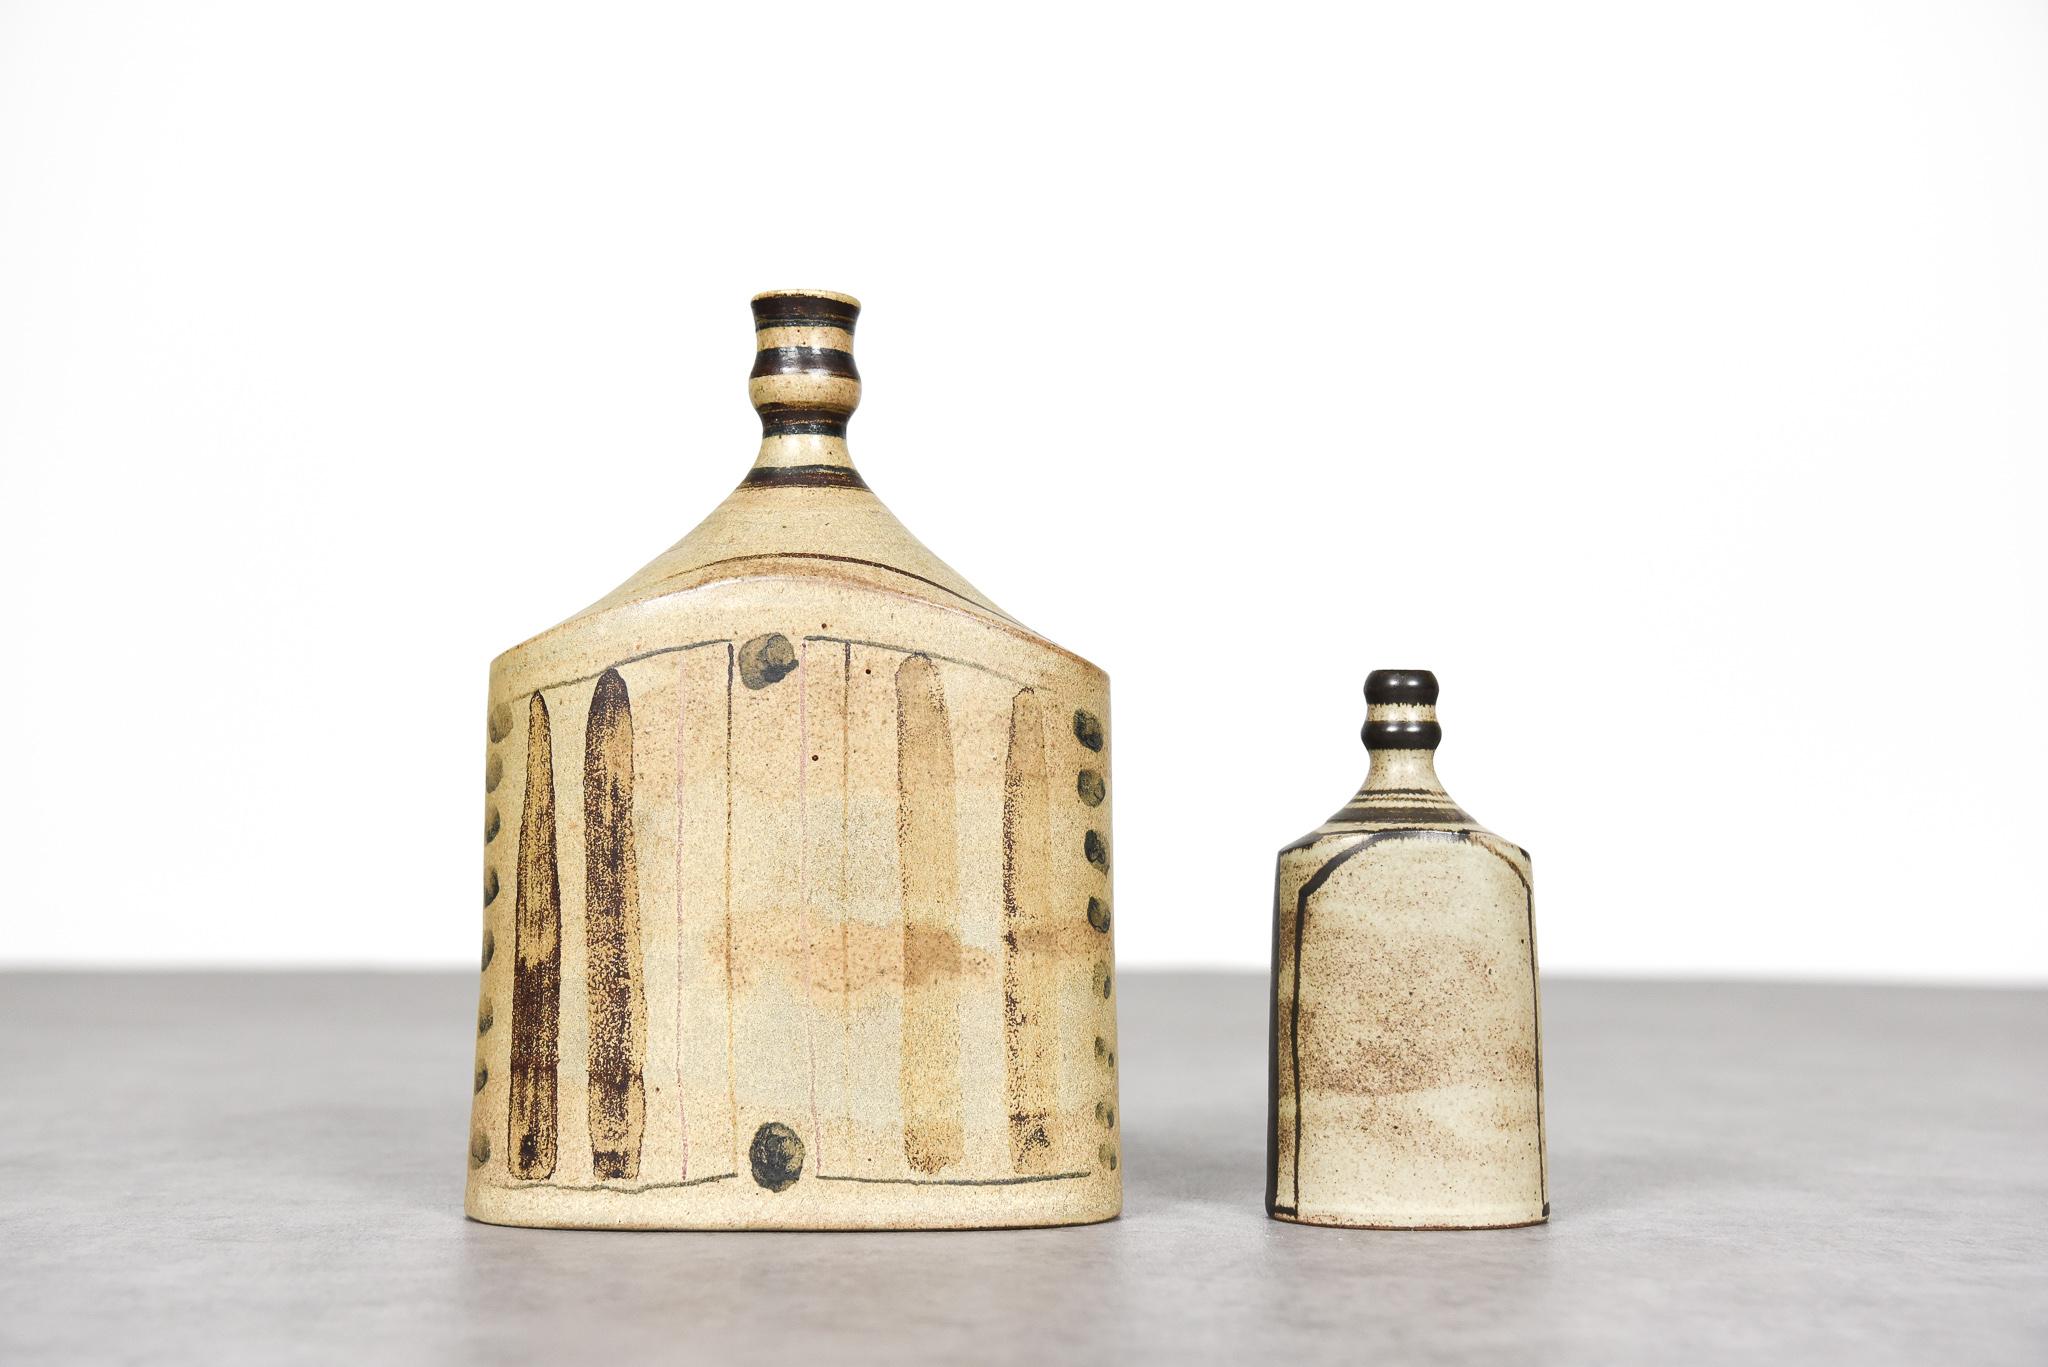 Very rare set of two ceramic bottle vases by Walburga Külz from her studio from 1968.

Measures: 25x17,5x8 cm
15x7,5x5,5 cm

Shipping or pickup in 48143 Münster possible.


Walburga Külz (* 22 September 1921 in Mittelberg; † 15 October 2002